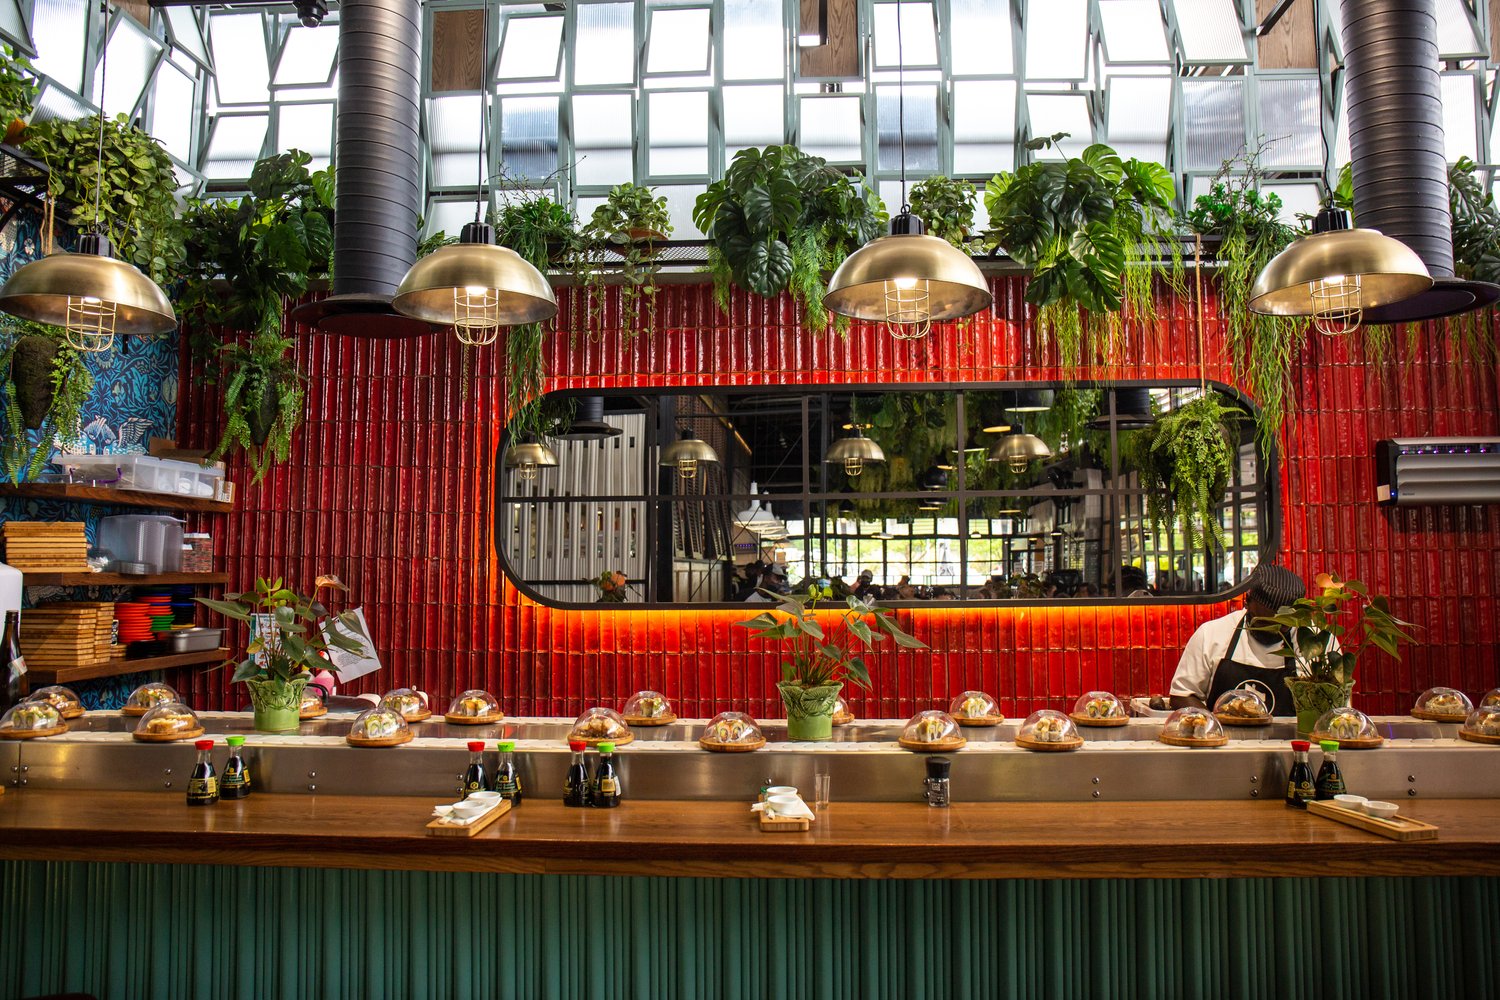 Gallery — Streatery